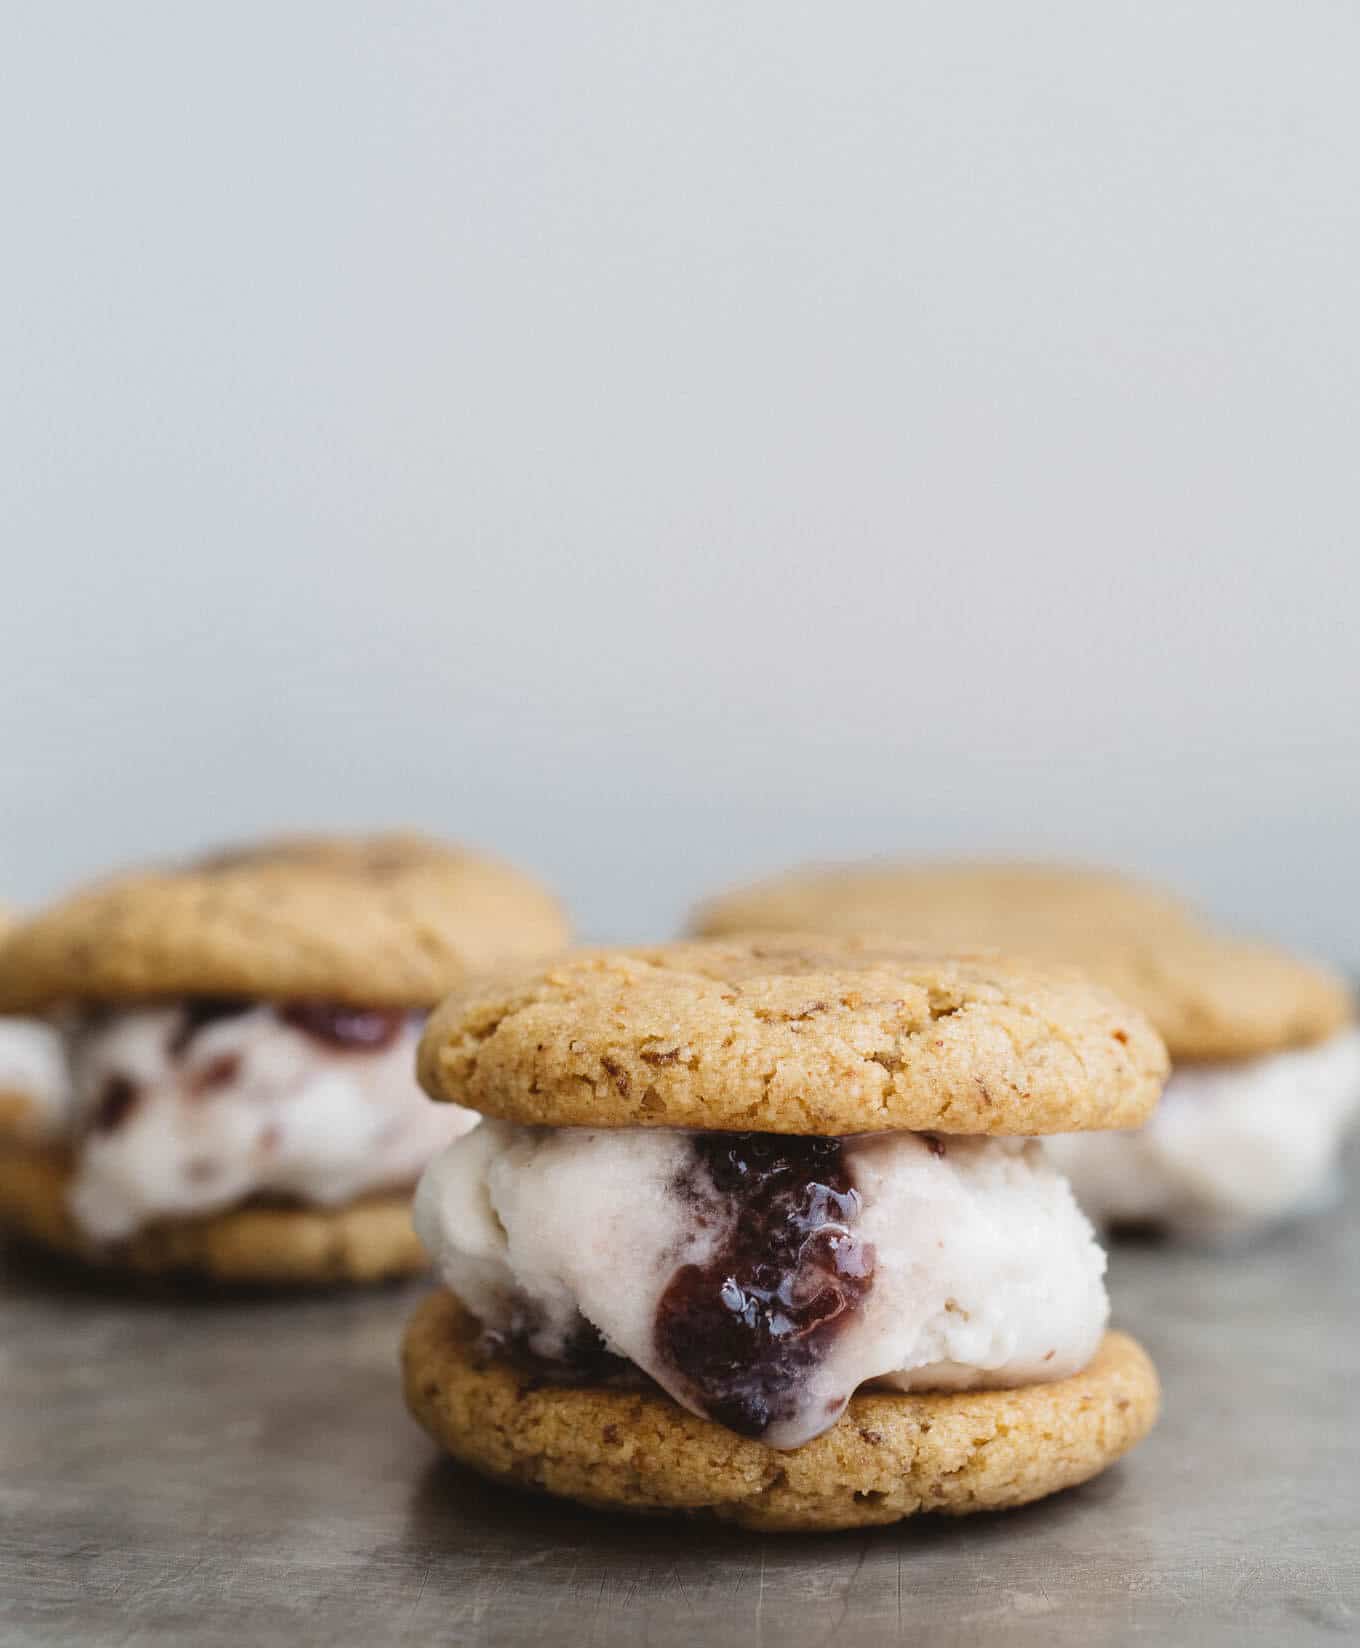 Peanut Butter and Jelly Ice Cream Sandwiches! Soft and chewy, maple-sweetened peanut butter cookies sandwiched around homemade vegan jam ice cream. Gluten-free, vegan, and refined sugar-free.